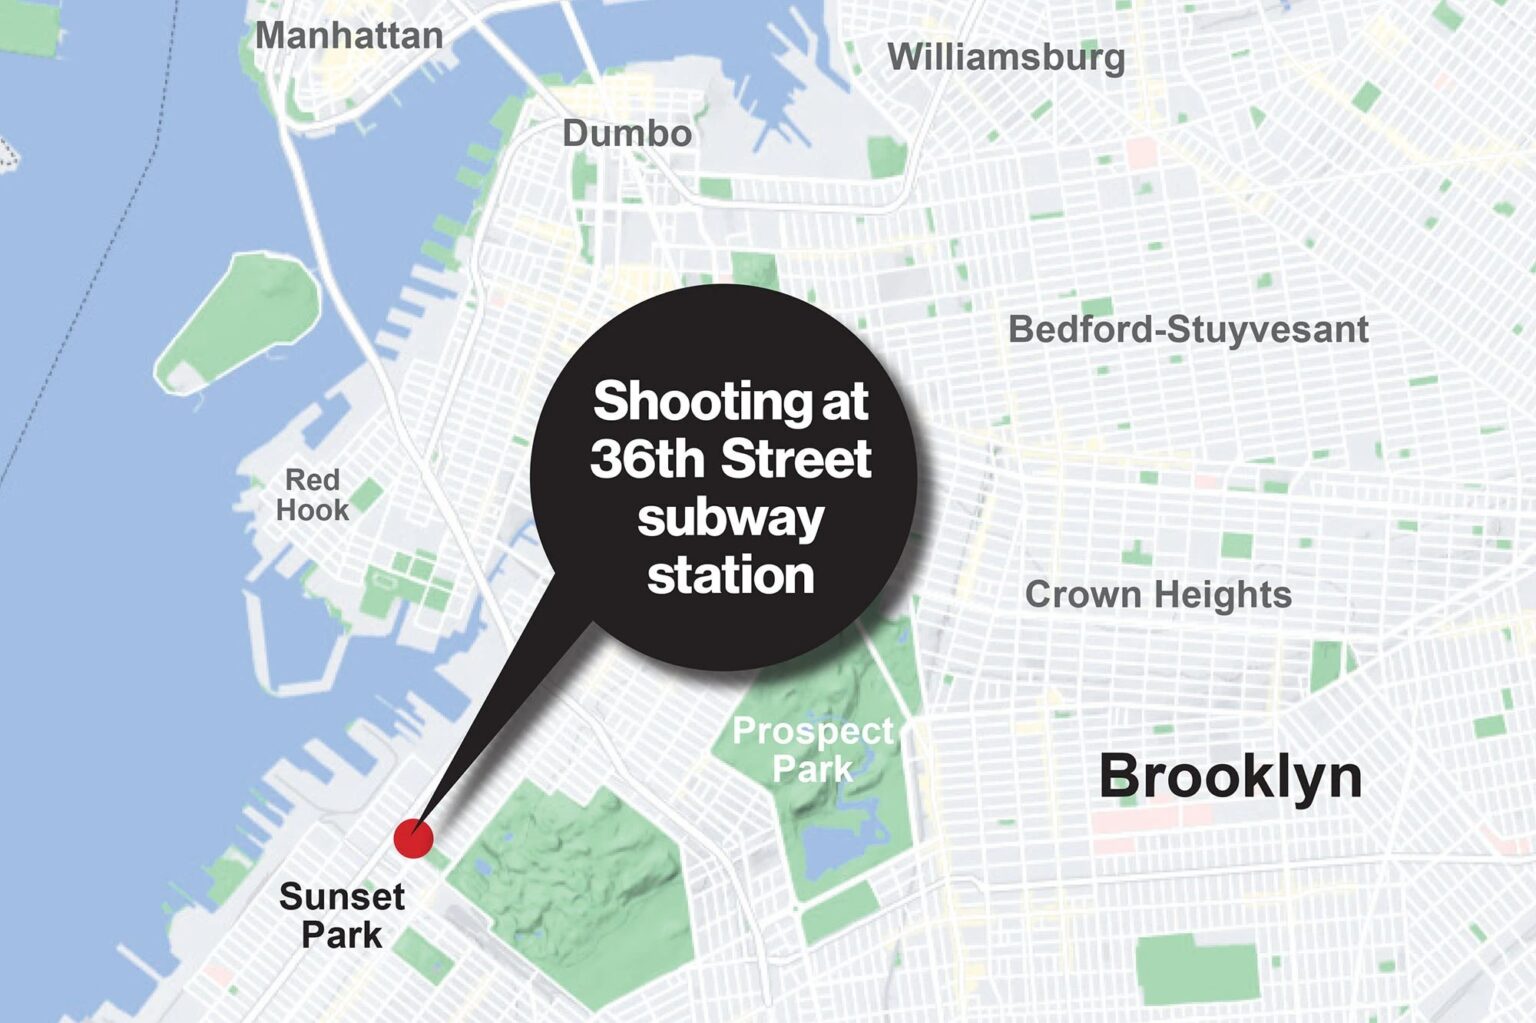 Live from Brooklyn New York from the Subway shooting – Live video